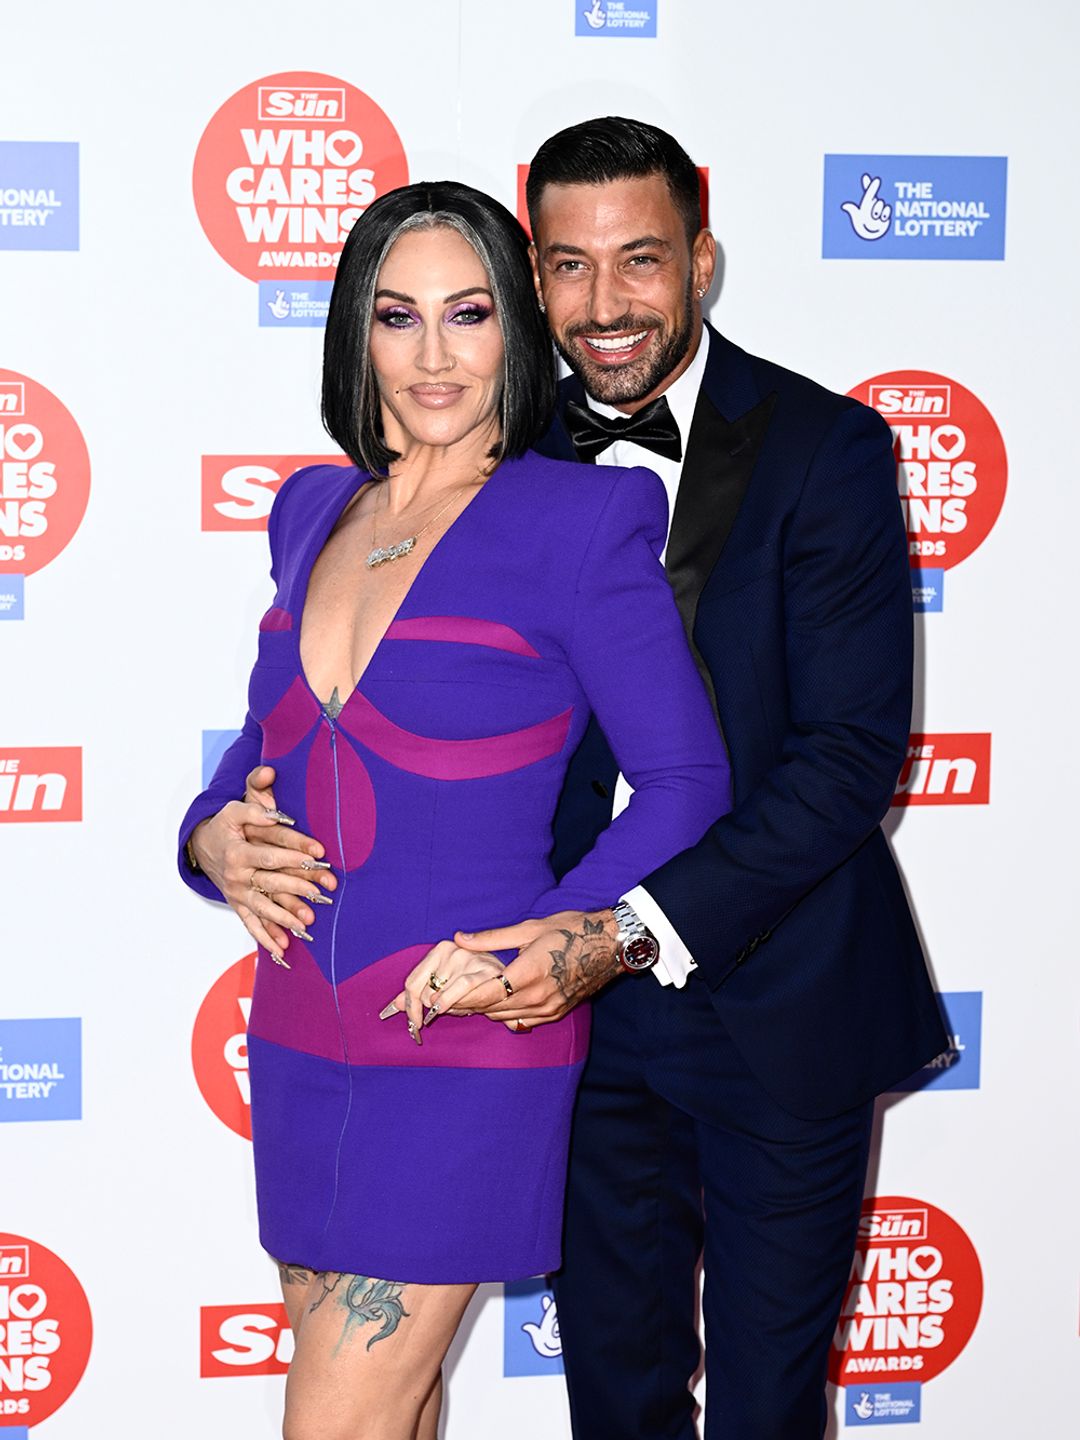 Michelle Visage and Giovanni Pernice cuddle up on the red carpet